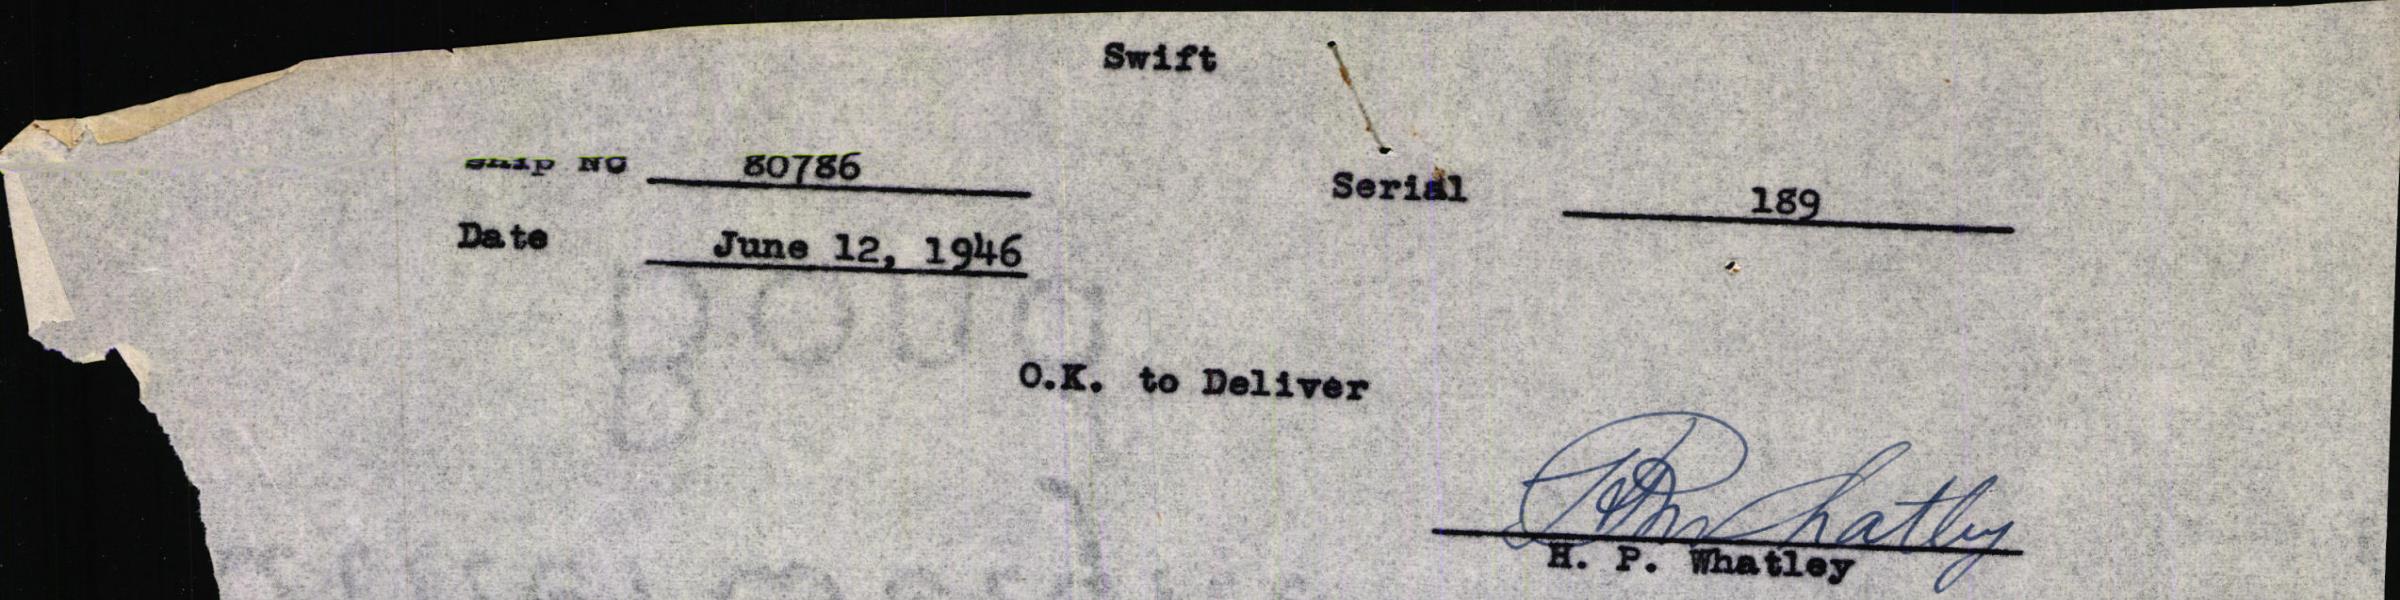 Sample page 3 from AirCorps Library document: Technical Information for Serial Number 189